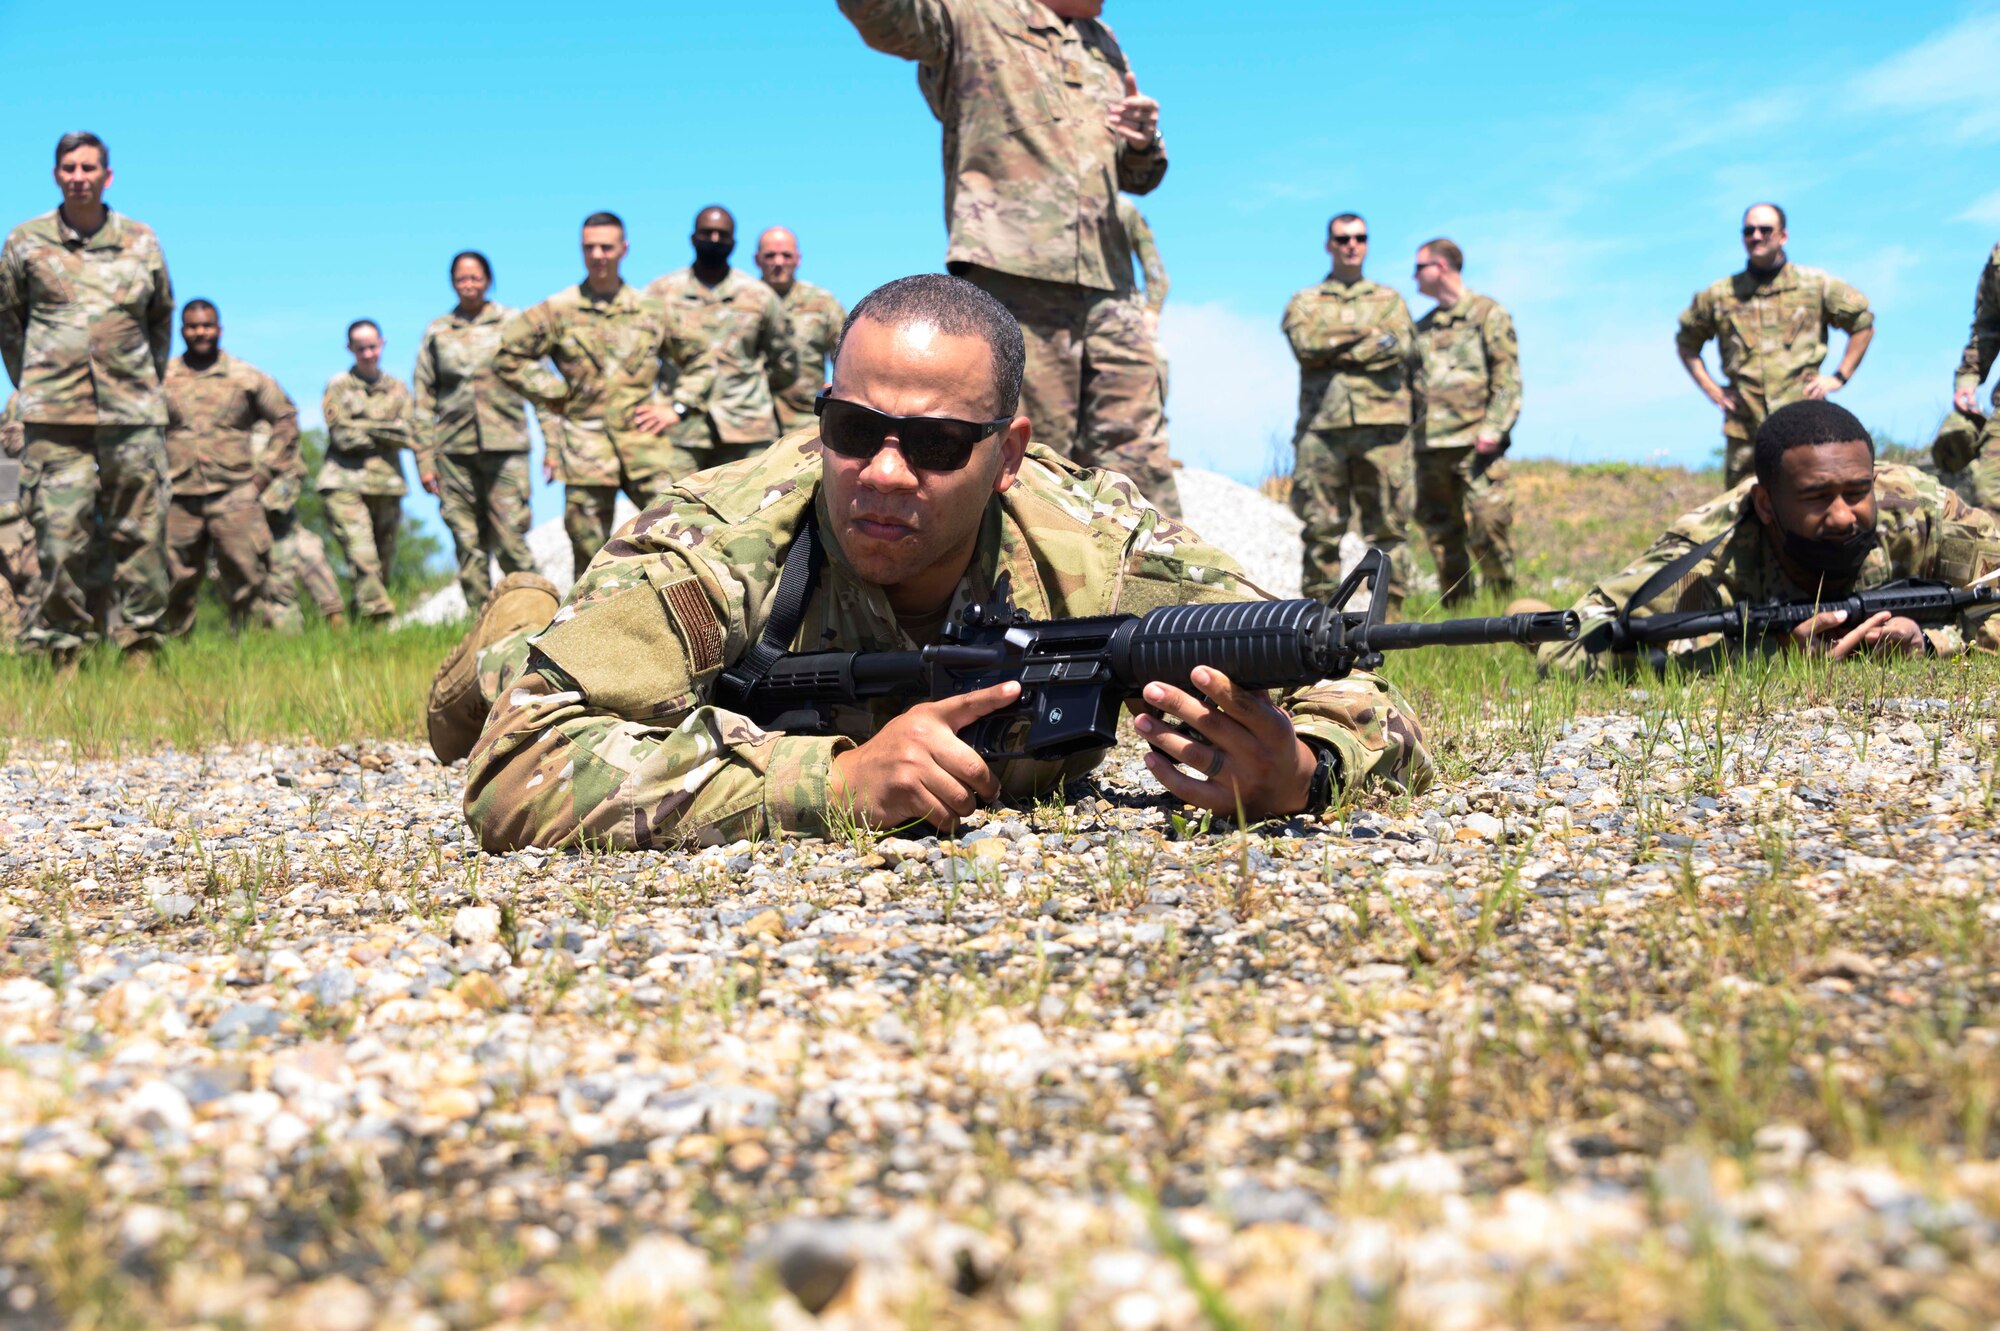 An Airman low crawls with a simulated M-4 Rifle.